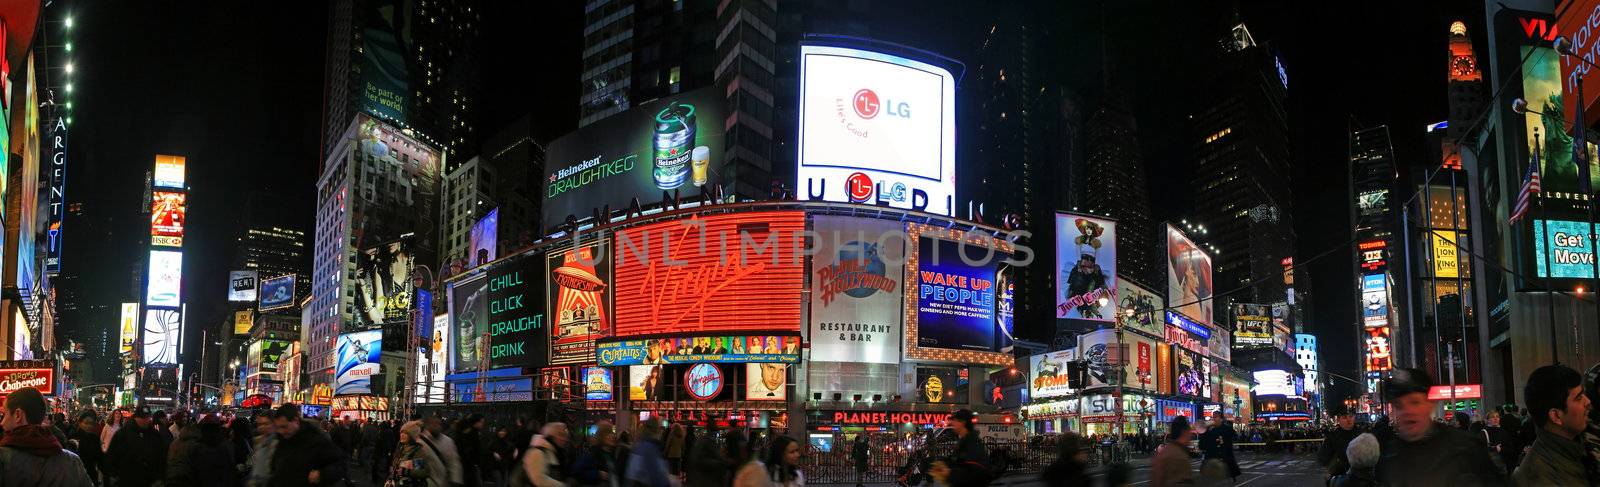 The panorama view of Times Square in New York City